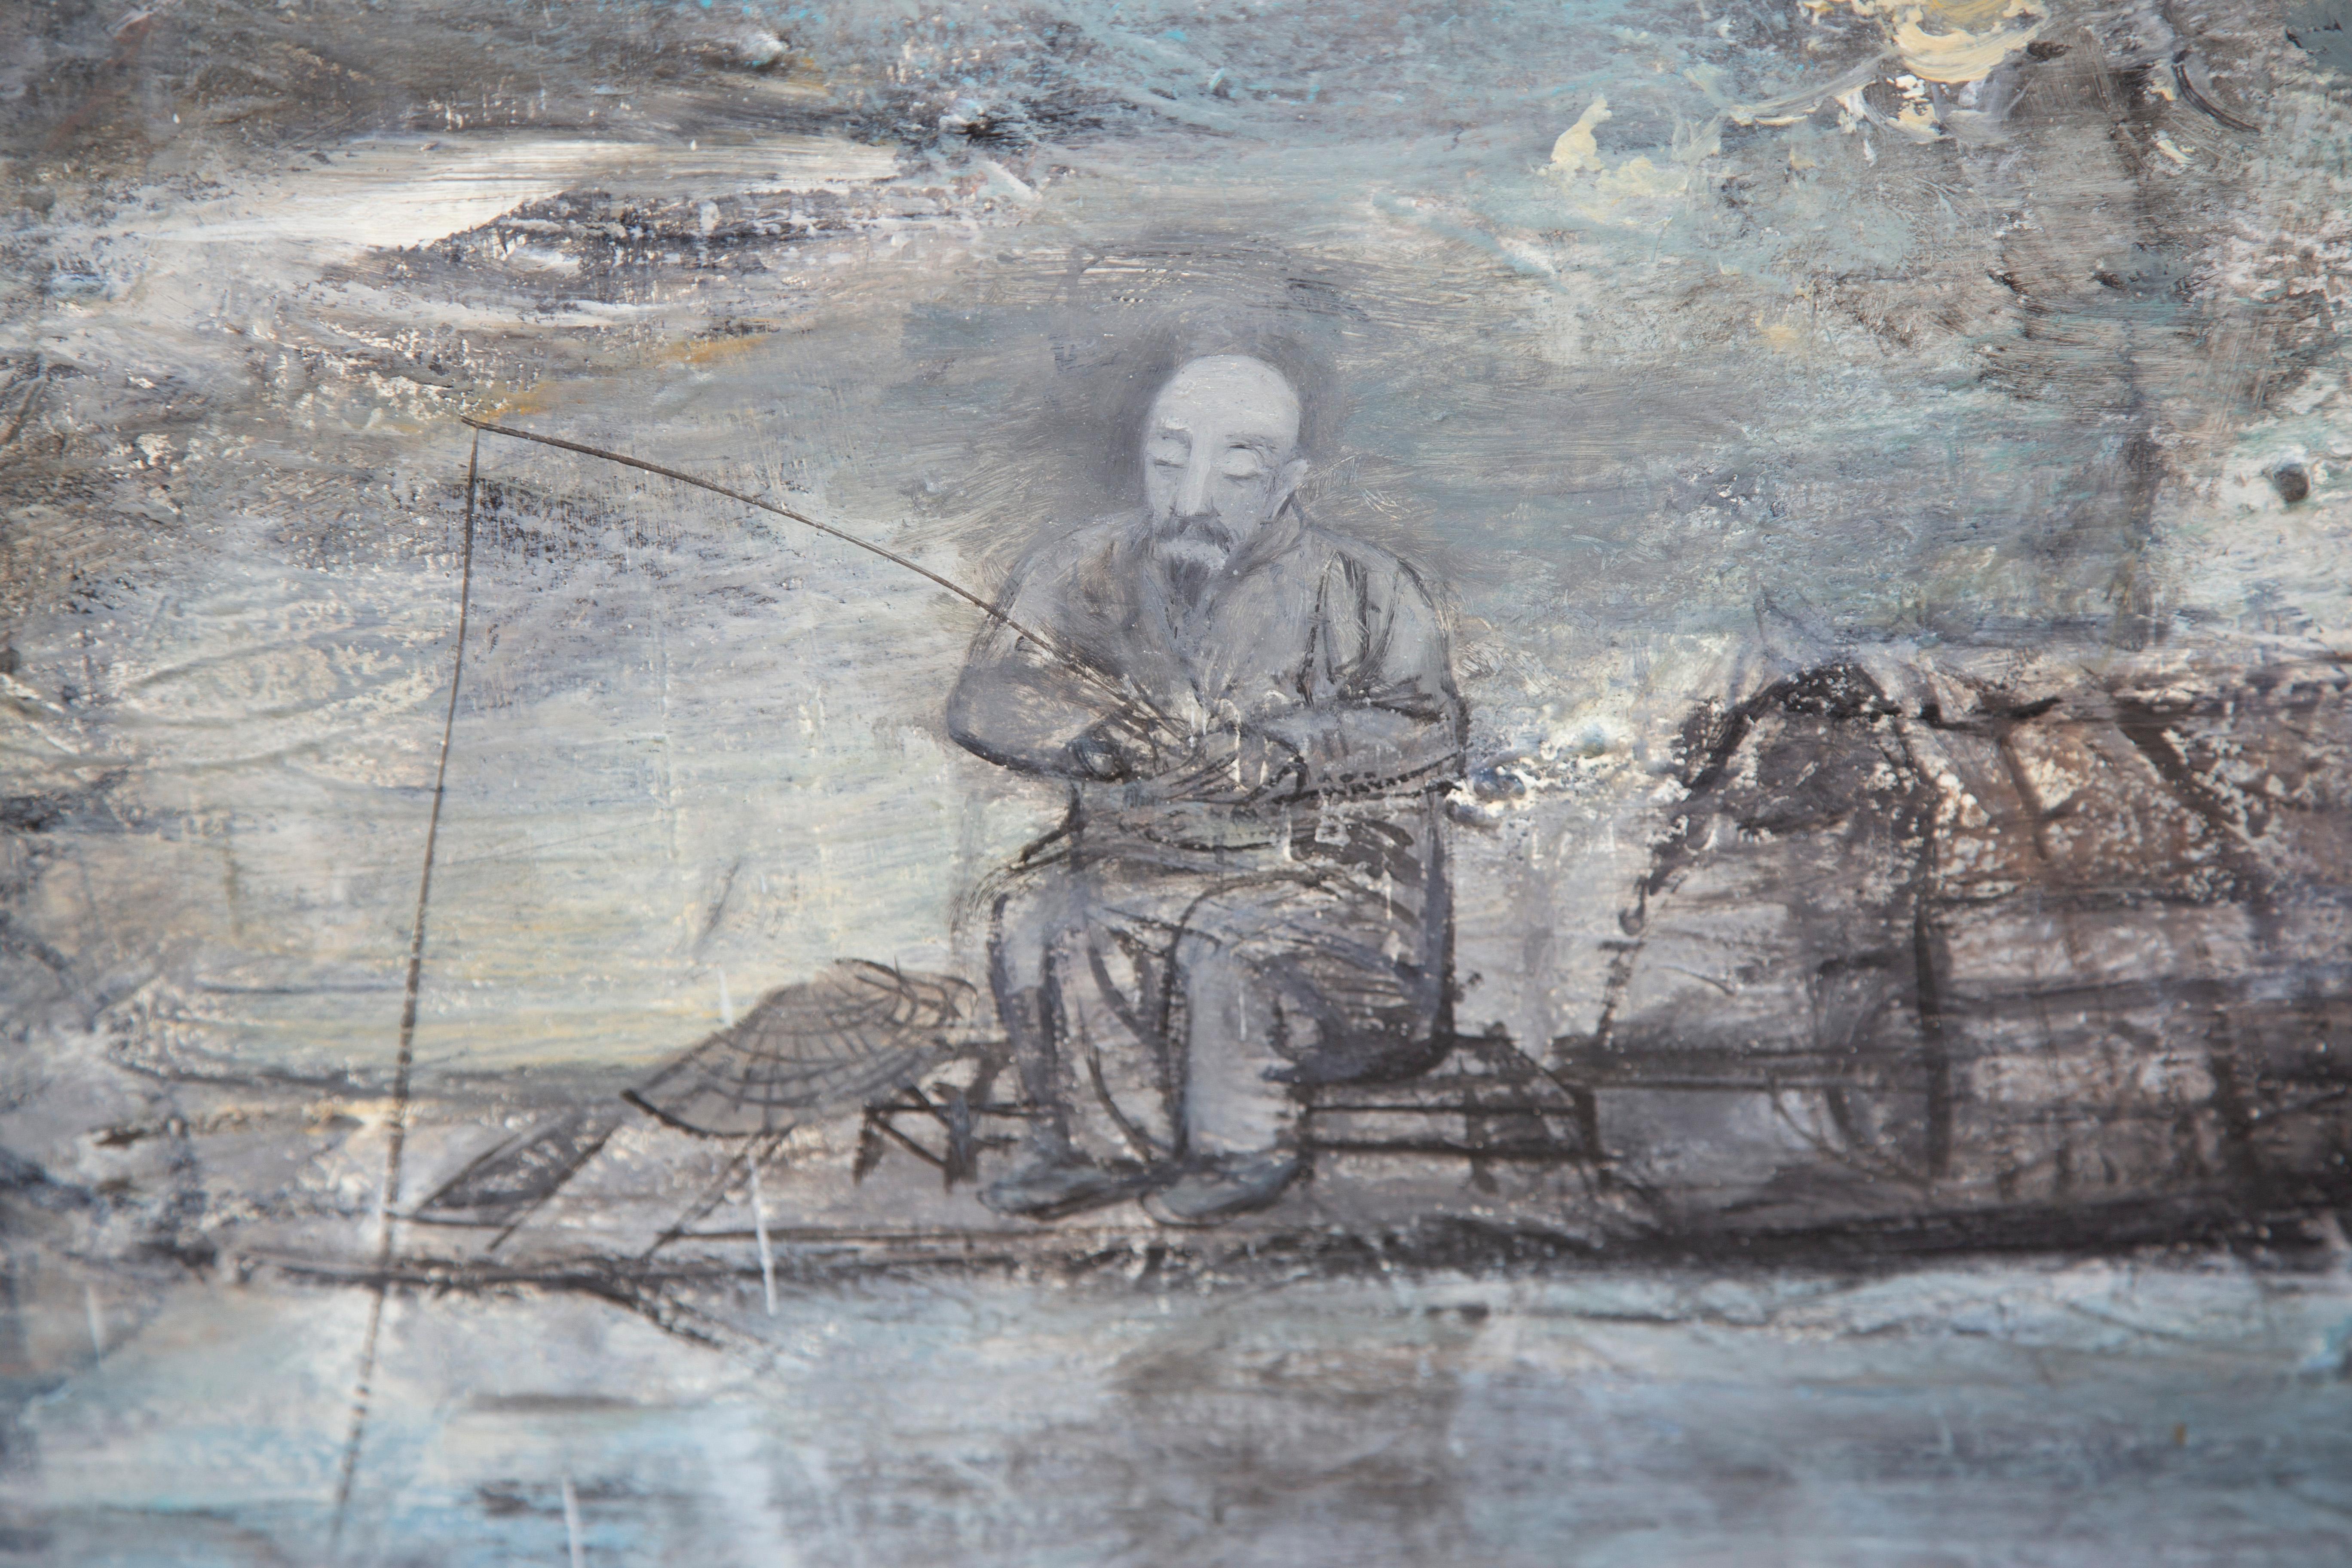 Fisherman on a Boat - Painting by Zuogong Lui